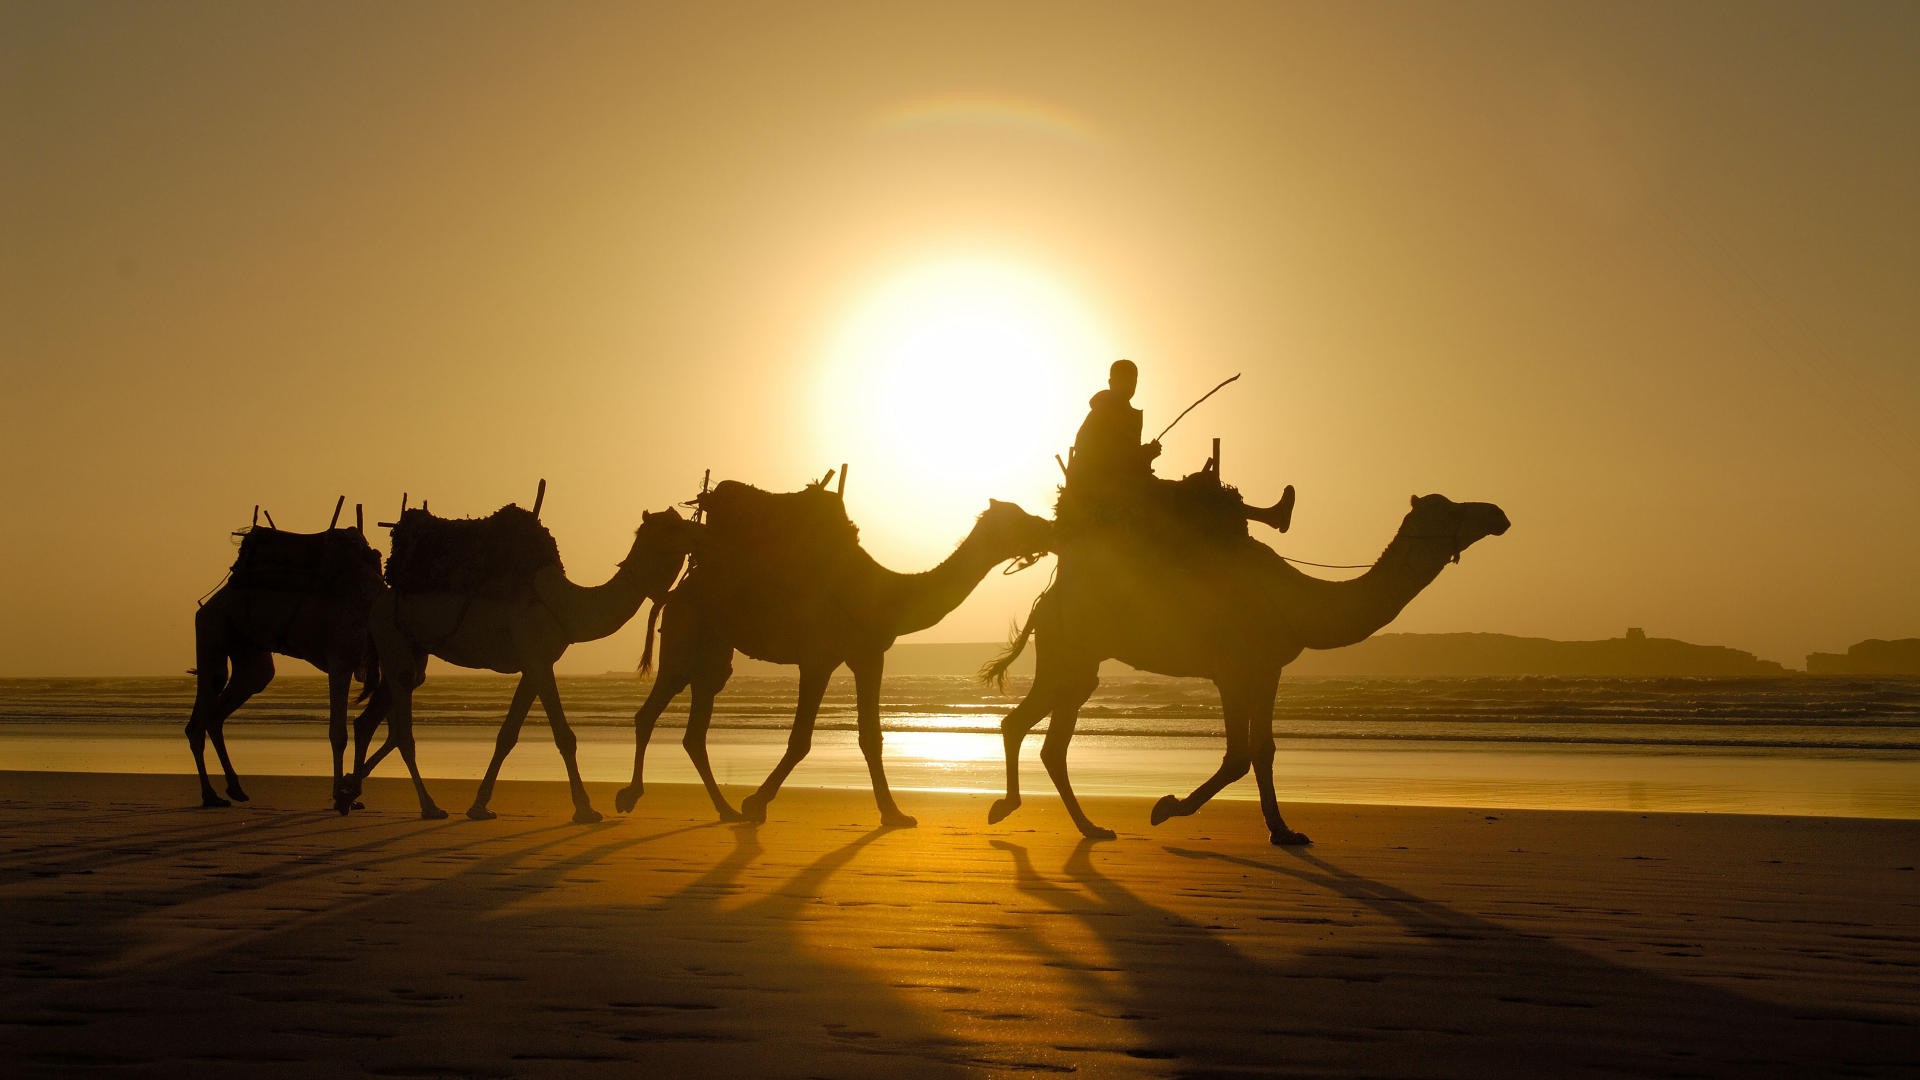 sand-camels-morocco-top-hd-new-wallpaper-free-downlaod-morocco-images